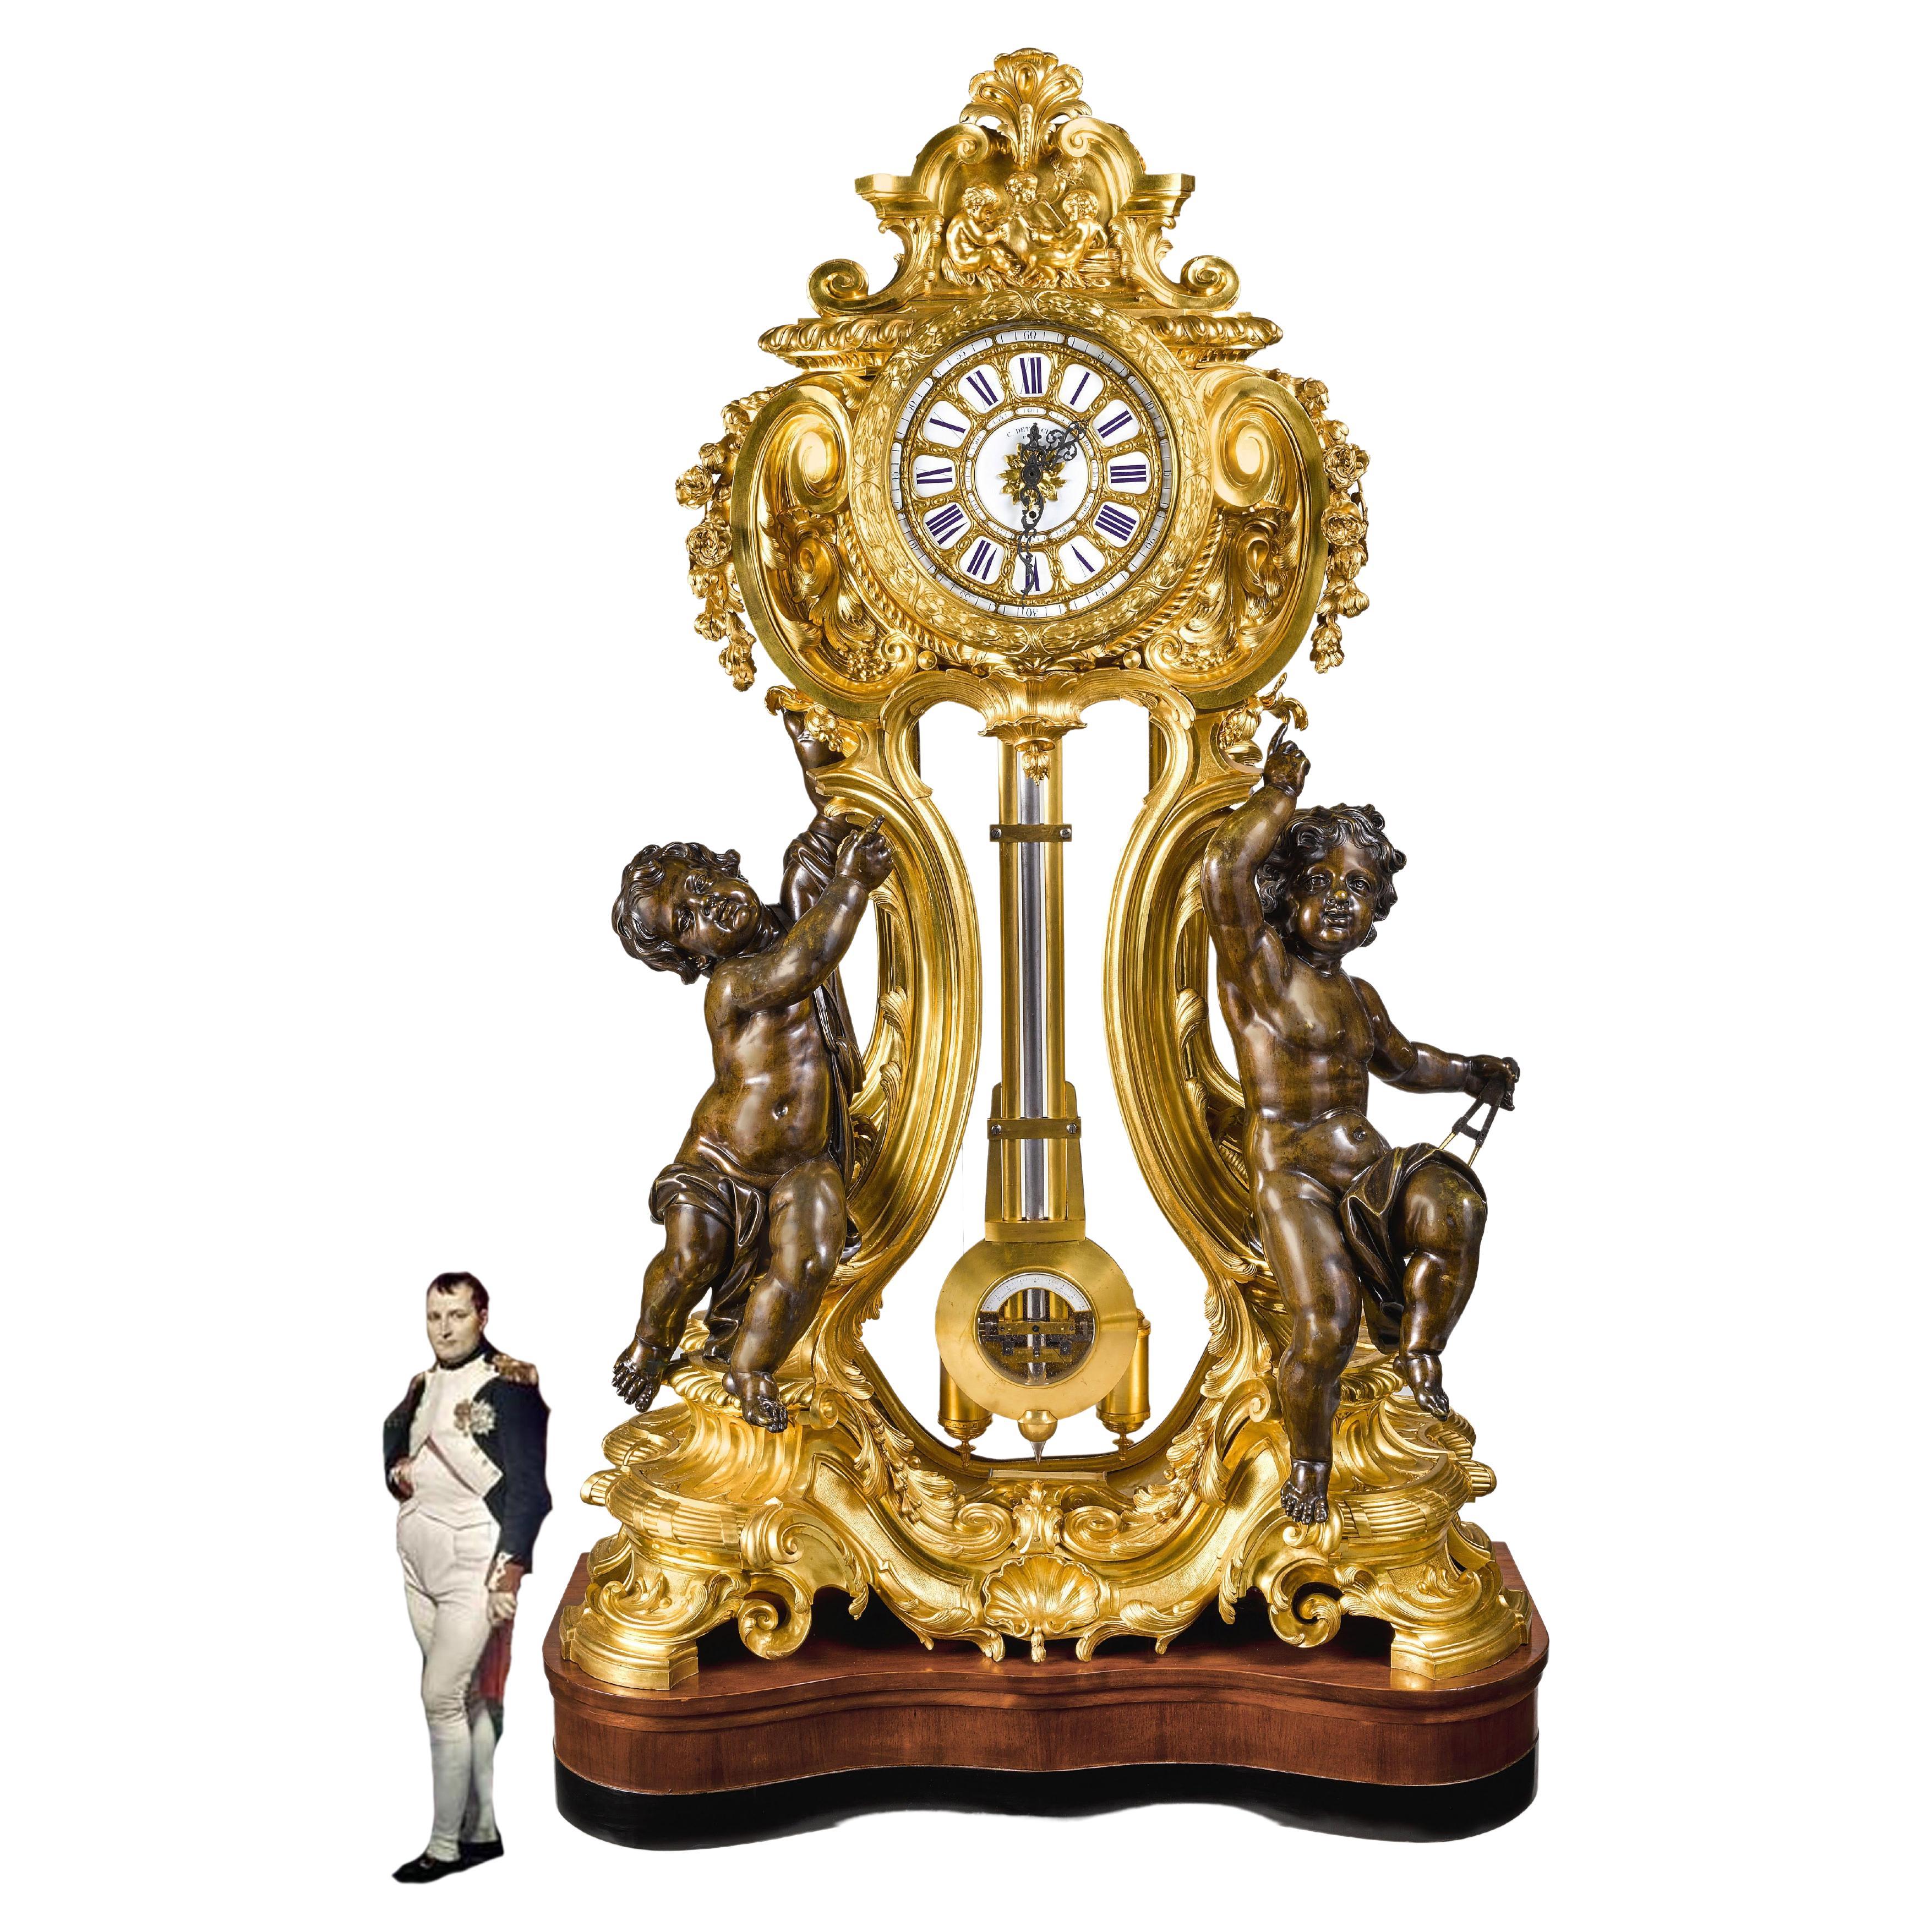 How much are old grandfather clocks worth?